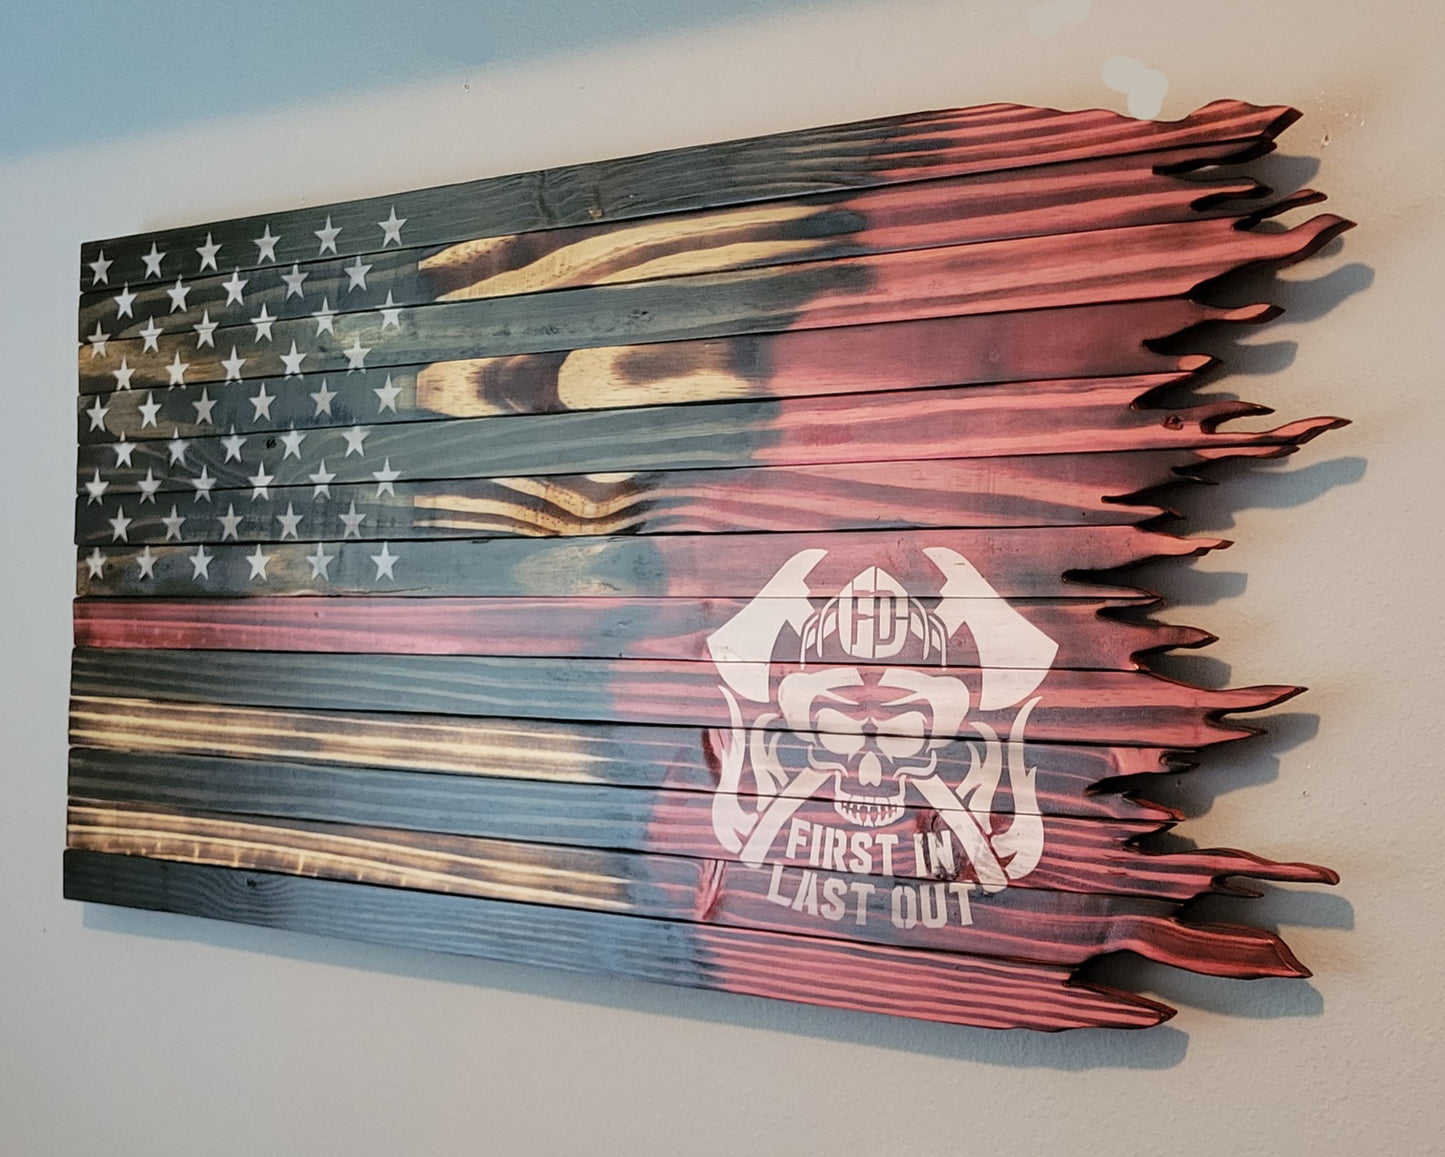 Firefighter "First In Last Out" Wooden American Flag with Jagged Edge